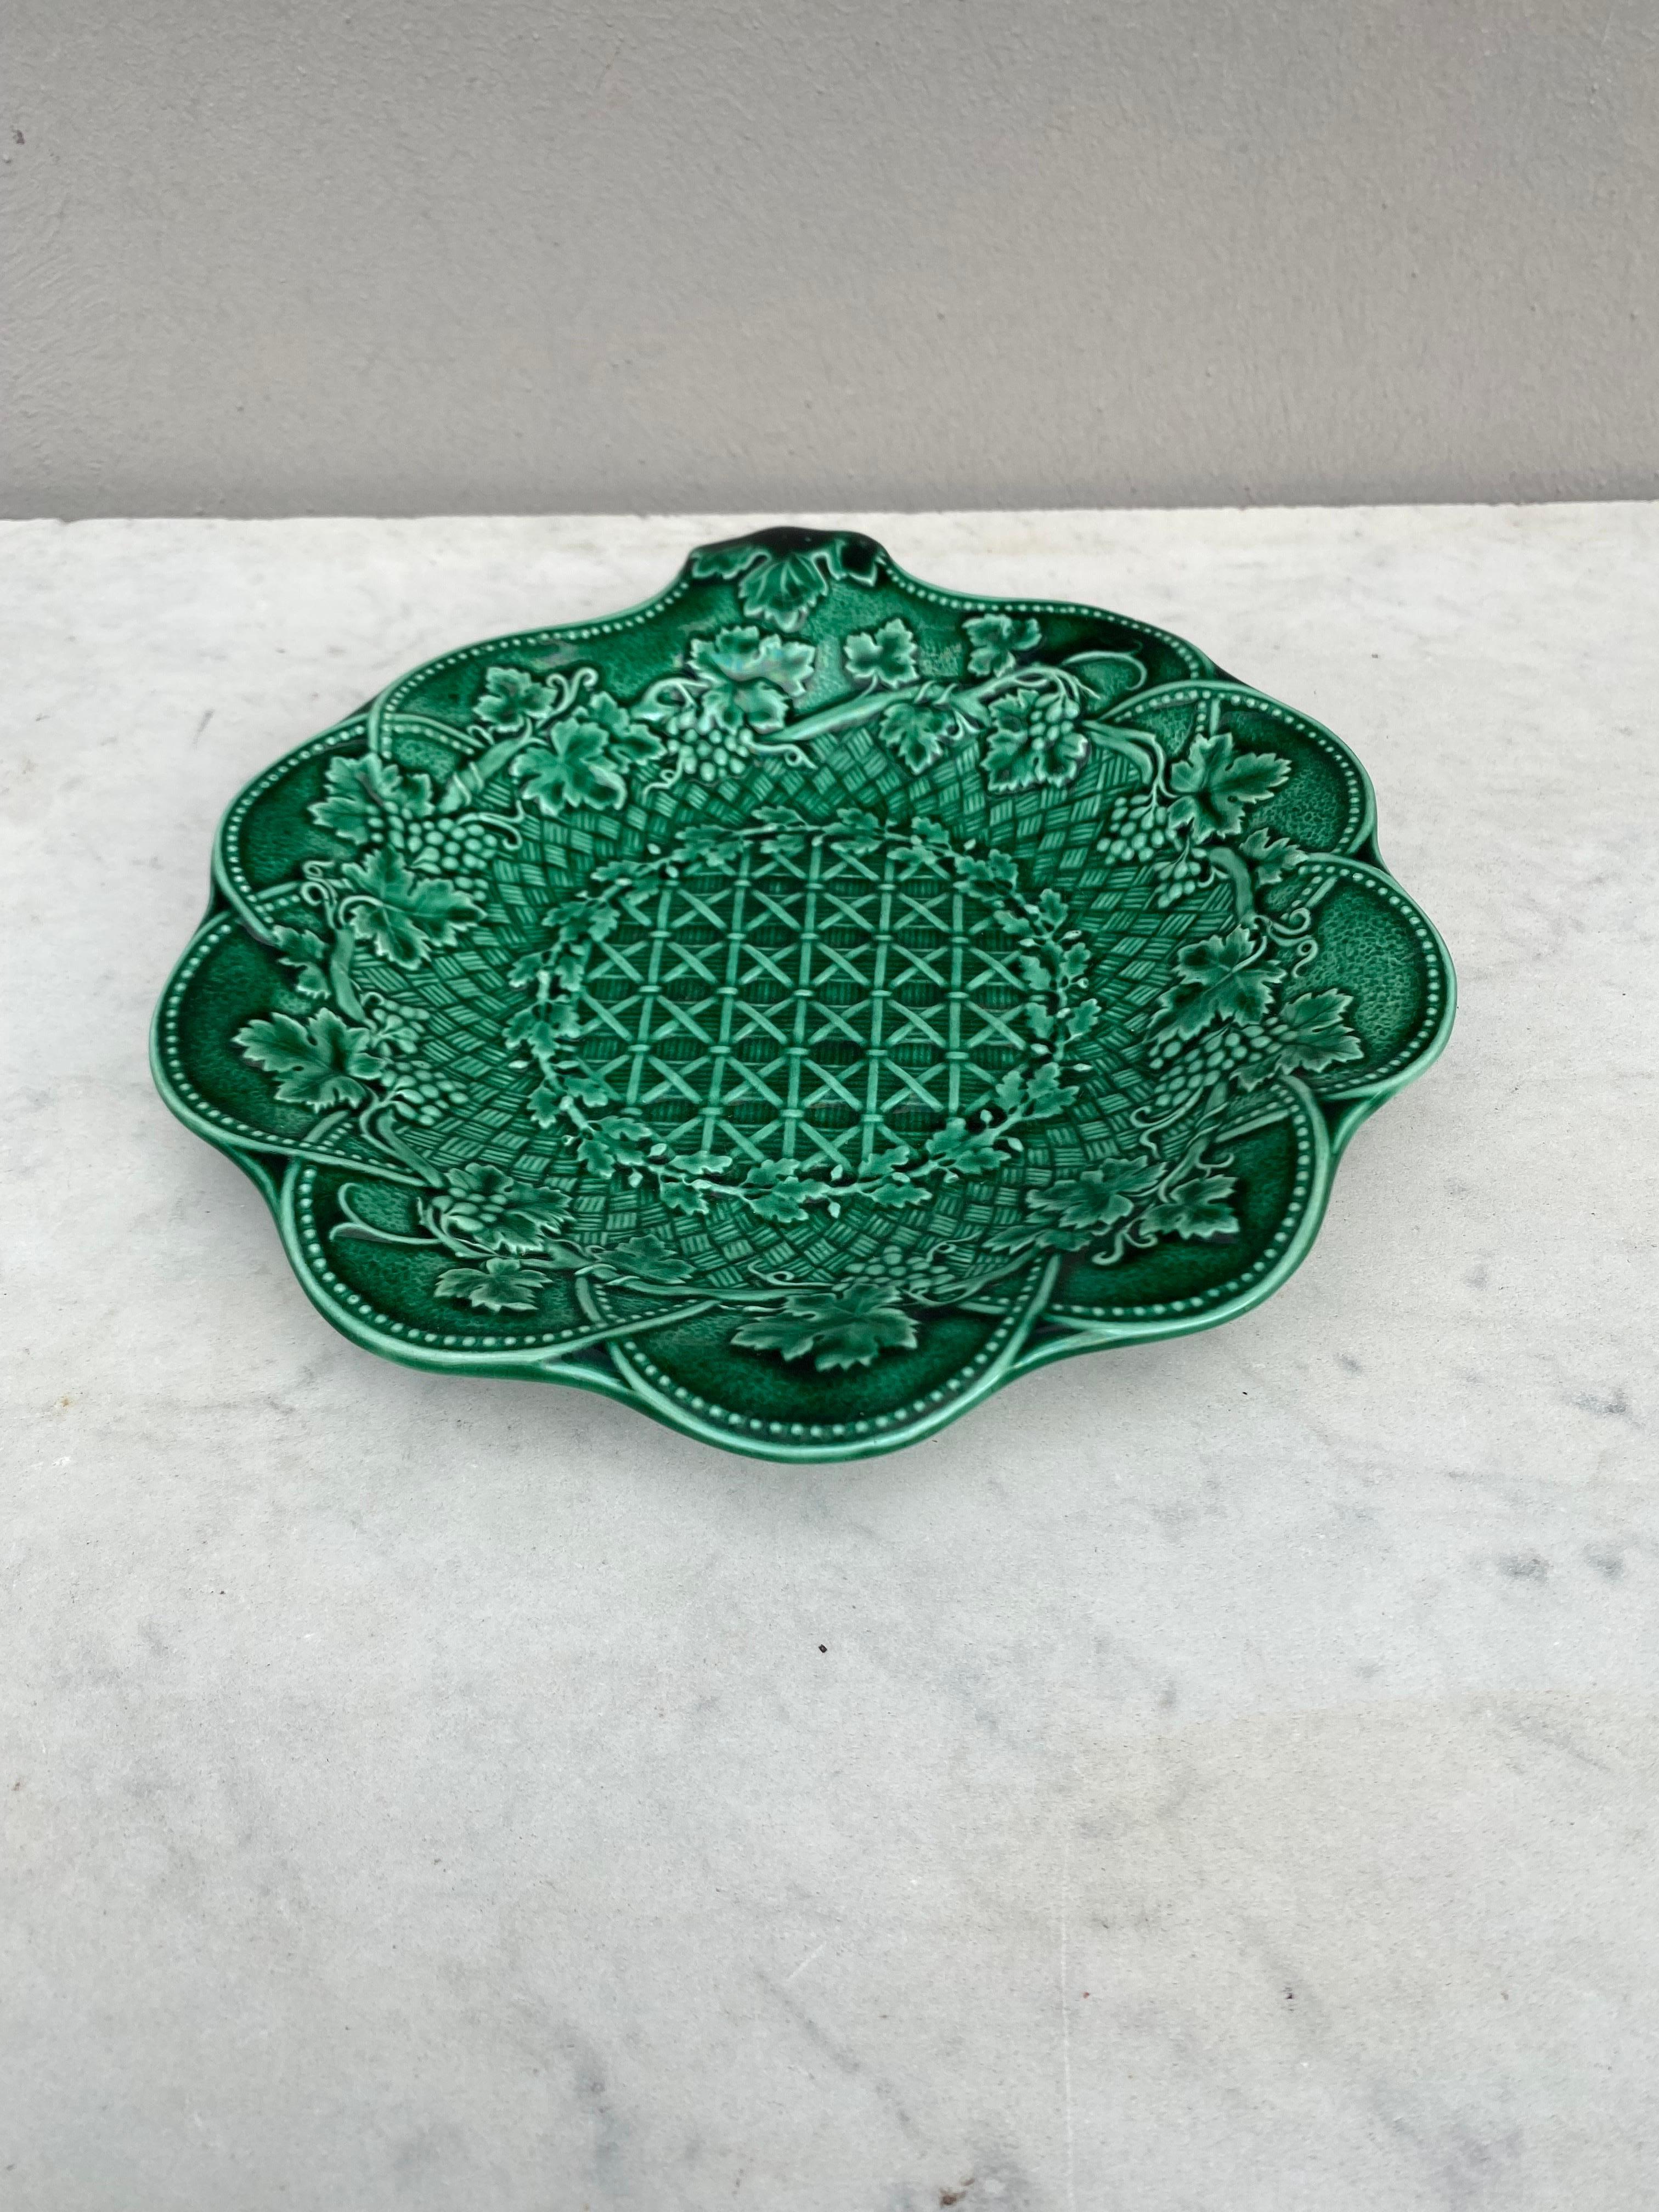 Victorian Majolica platter signed Wedgwood end of 19th century.
Basketweave  with a border of grapes leaves and fruits , treillis on the center.
Measures: 9.3 by 8.5 inches, height / 1.3 inches.